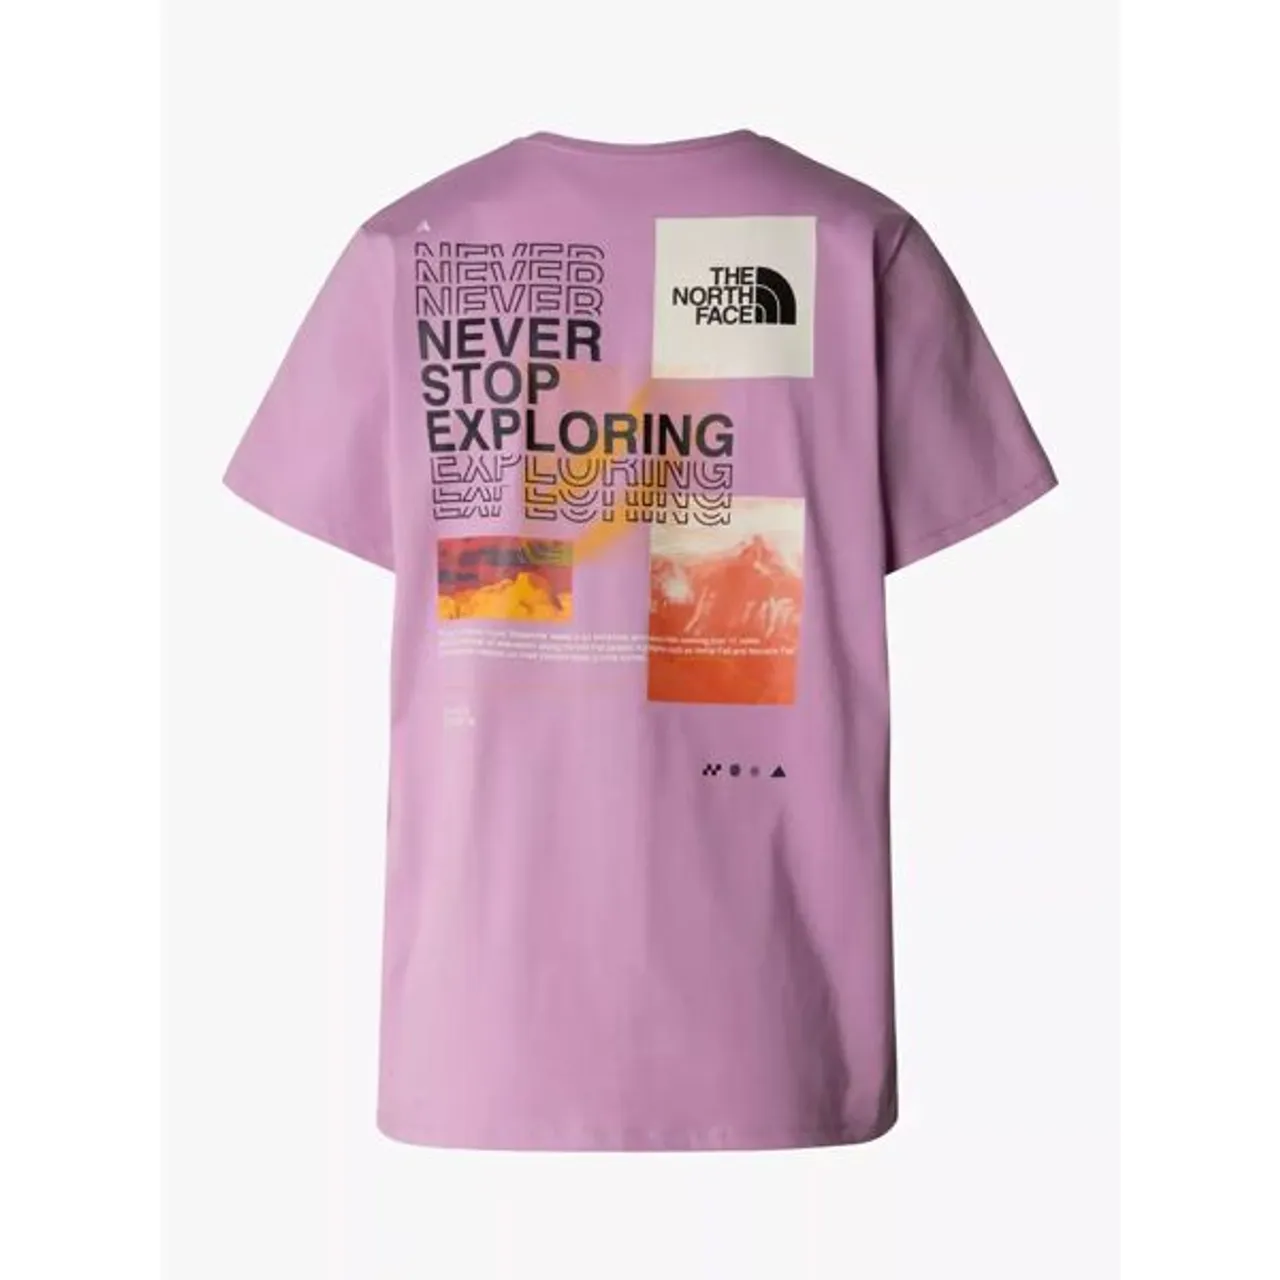 The North Face Foundation Mountain Graphic T-Shirt, Mineral Purple - Mineral Purple - Female